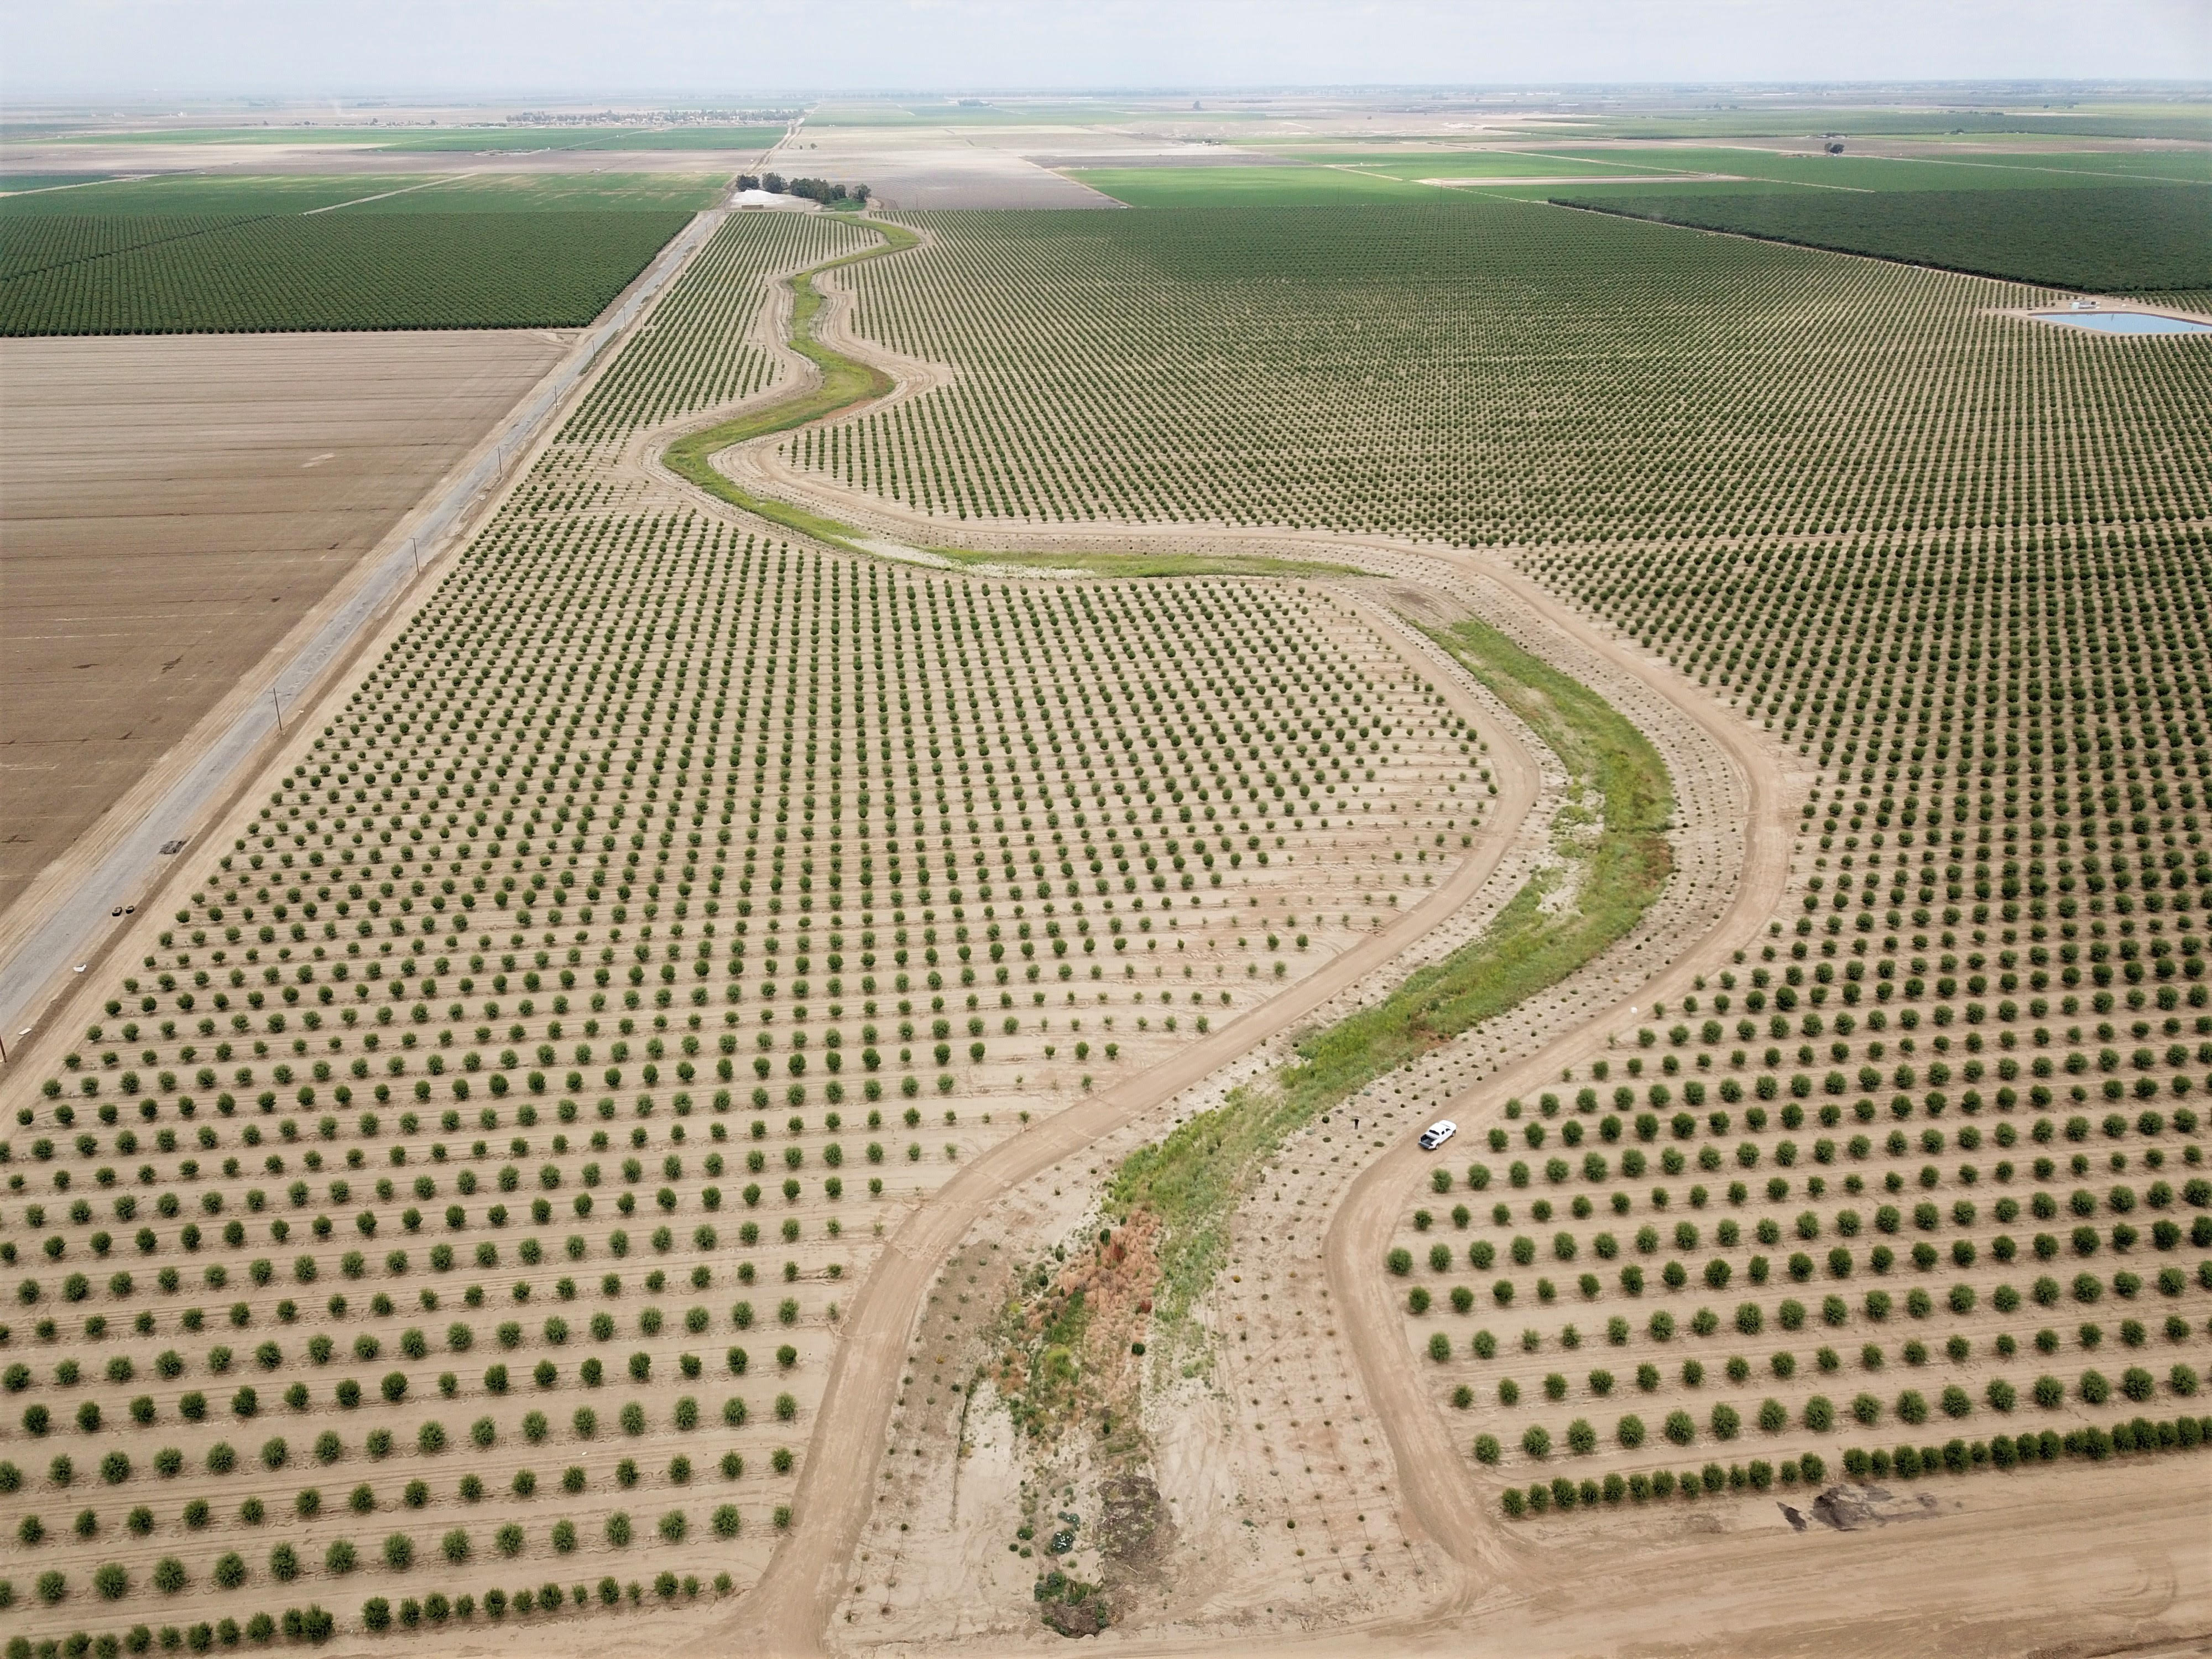 An aerial view of an arid agricultural landscape shows a long hedgerow slicing through grid-like fields.